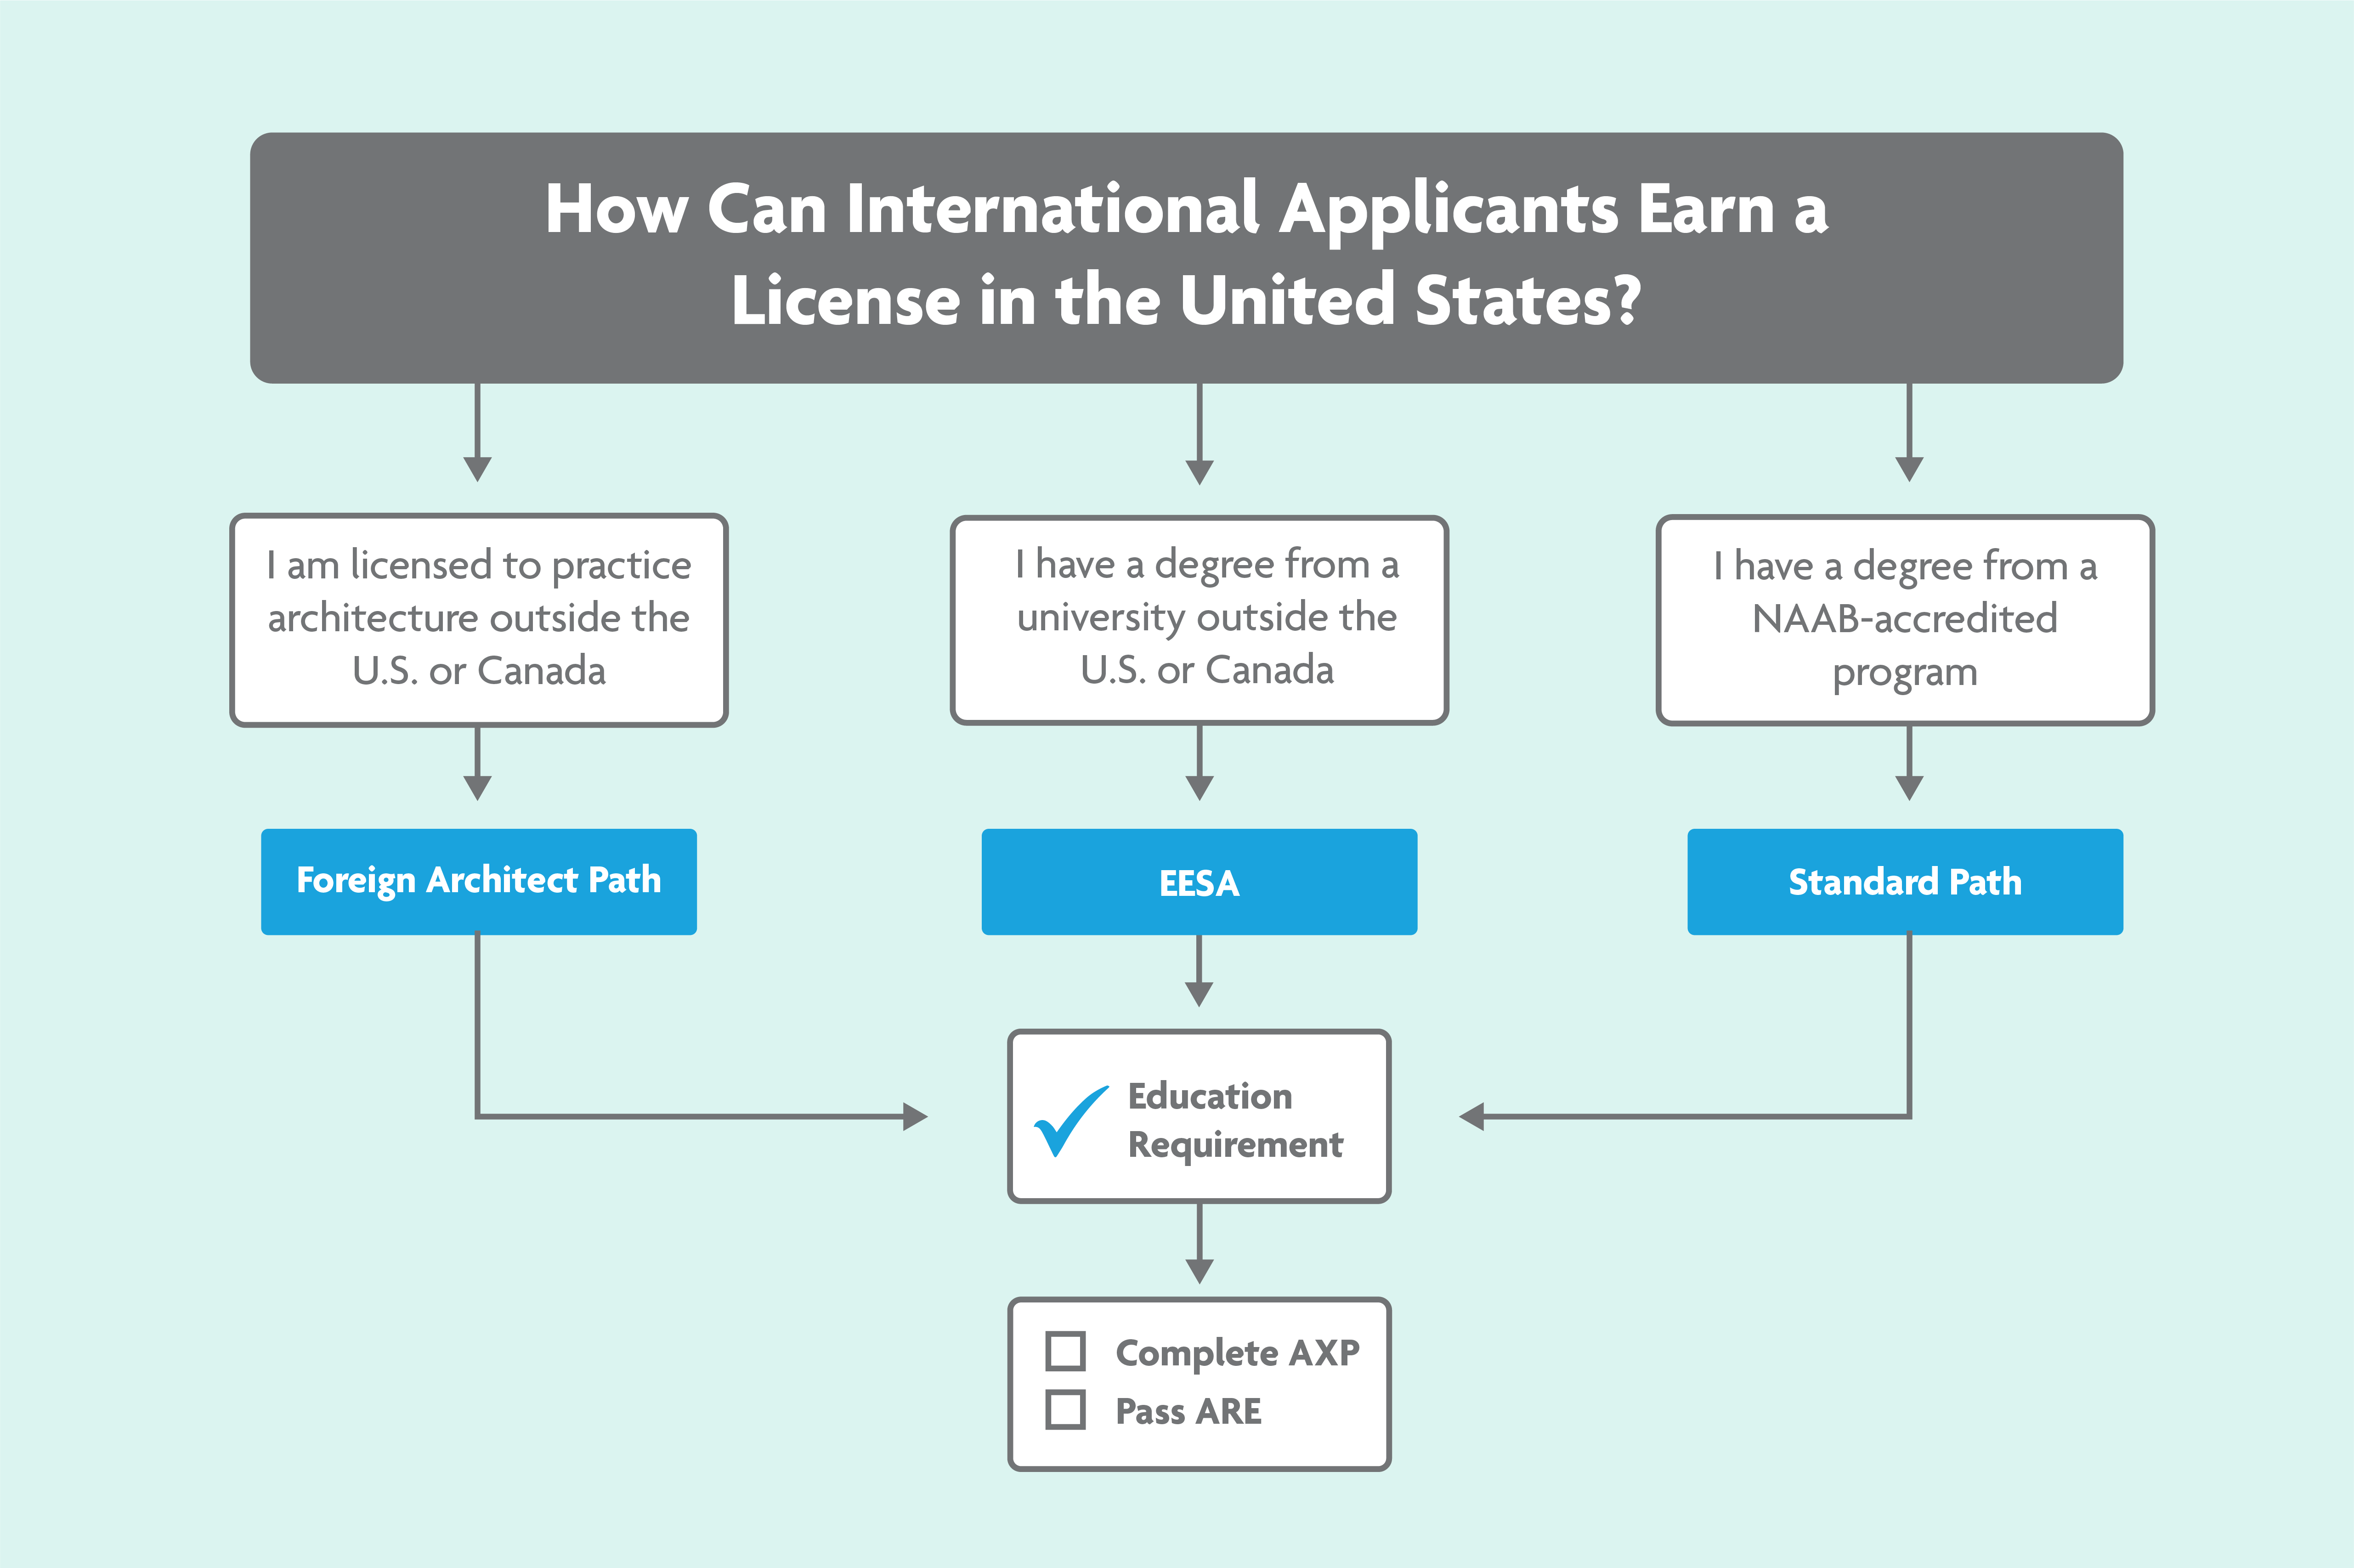 Image description: A flow chart that starts with the question, "How can international applicants earn a license in the United States?" For detailed image description, see paragraph "Flow Chart Full Text"  